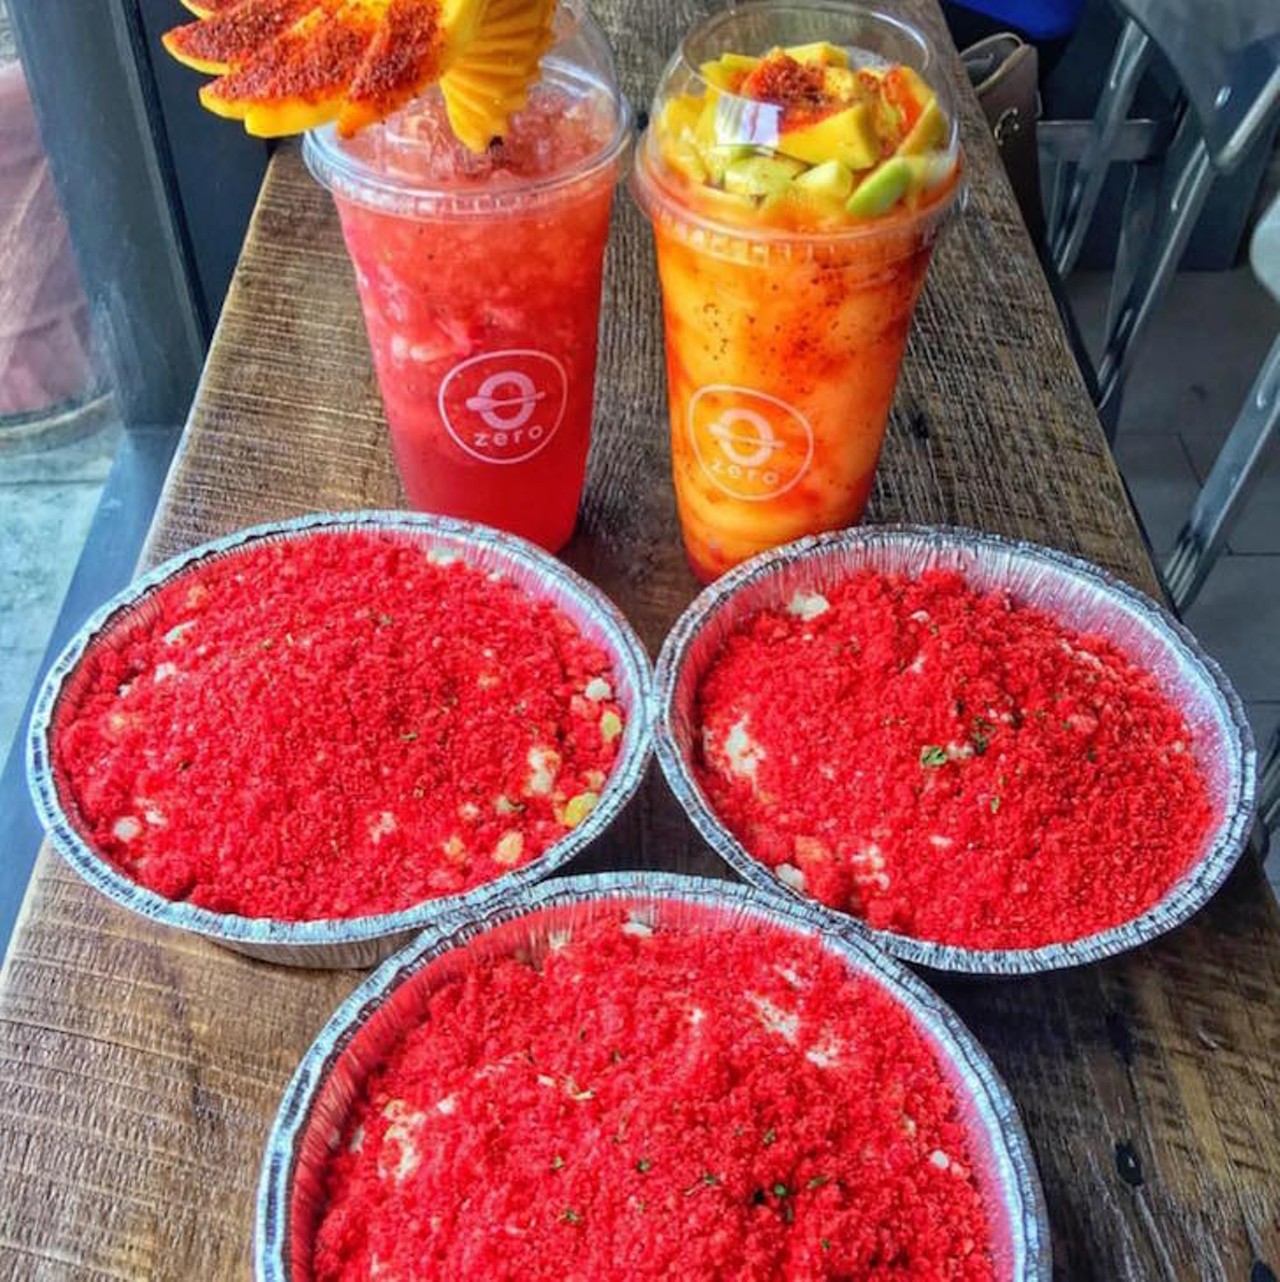 Zero Degrees: XXTRA Flamin&#146; Hot Elotes  
Multiple locations
Grilled Mexican street corn meets Flamin&#146; Hot Cheetos meets chicharrones. This Asian-Hispanic fusion cafe also serves up Flamin' Hot Cheeto-covered cheese fries if you&#146;re still hungry. 
Photo via Facebook/Zero Degrees Company